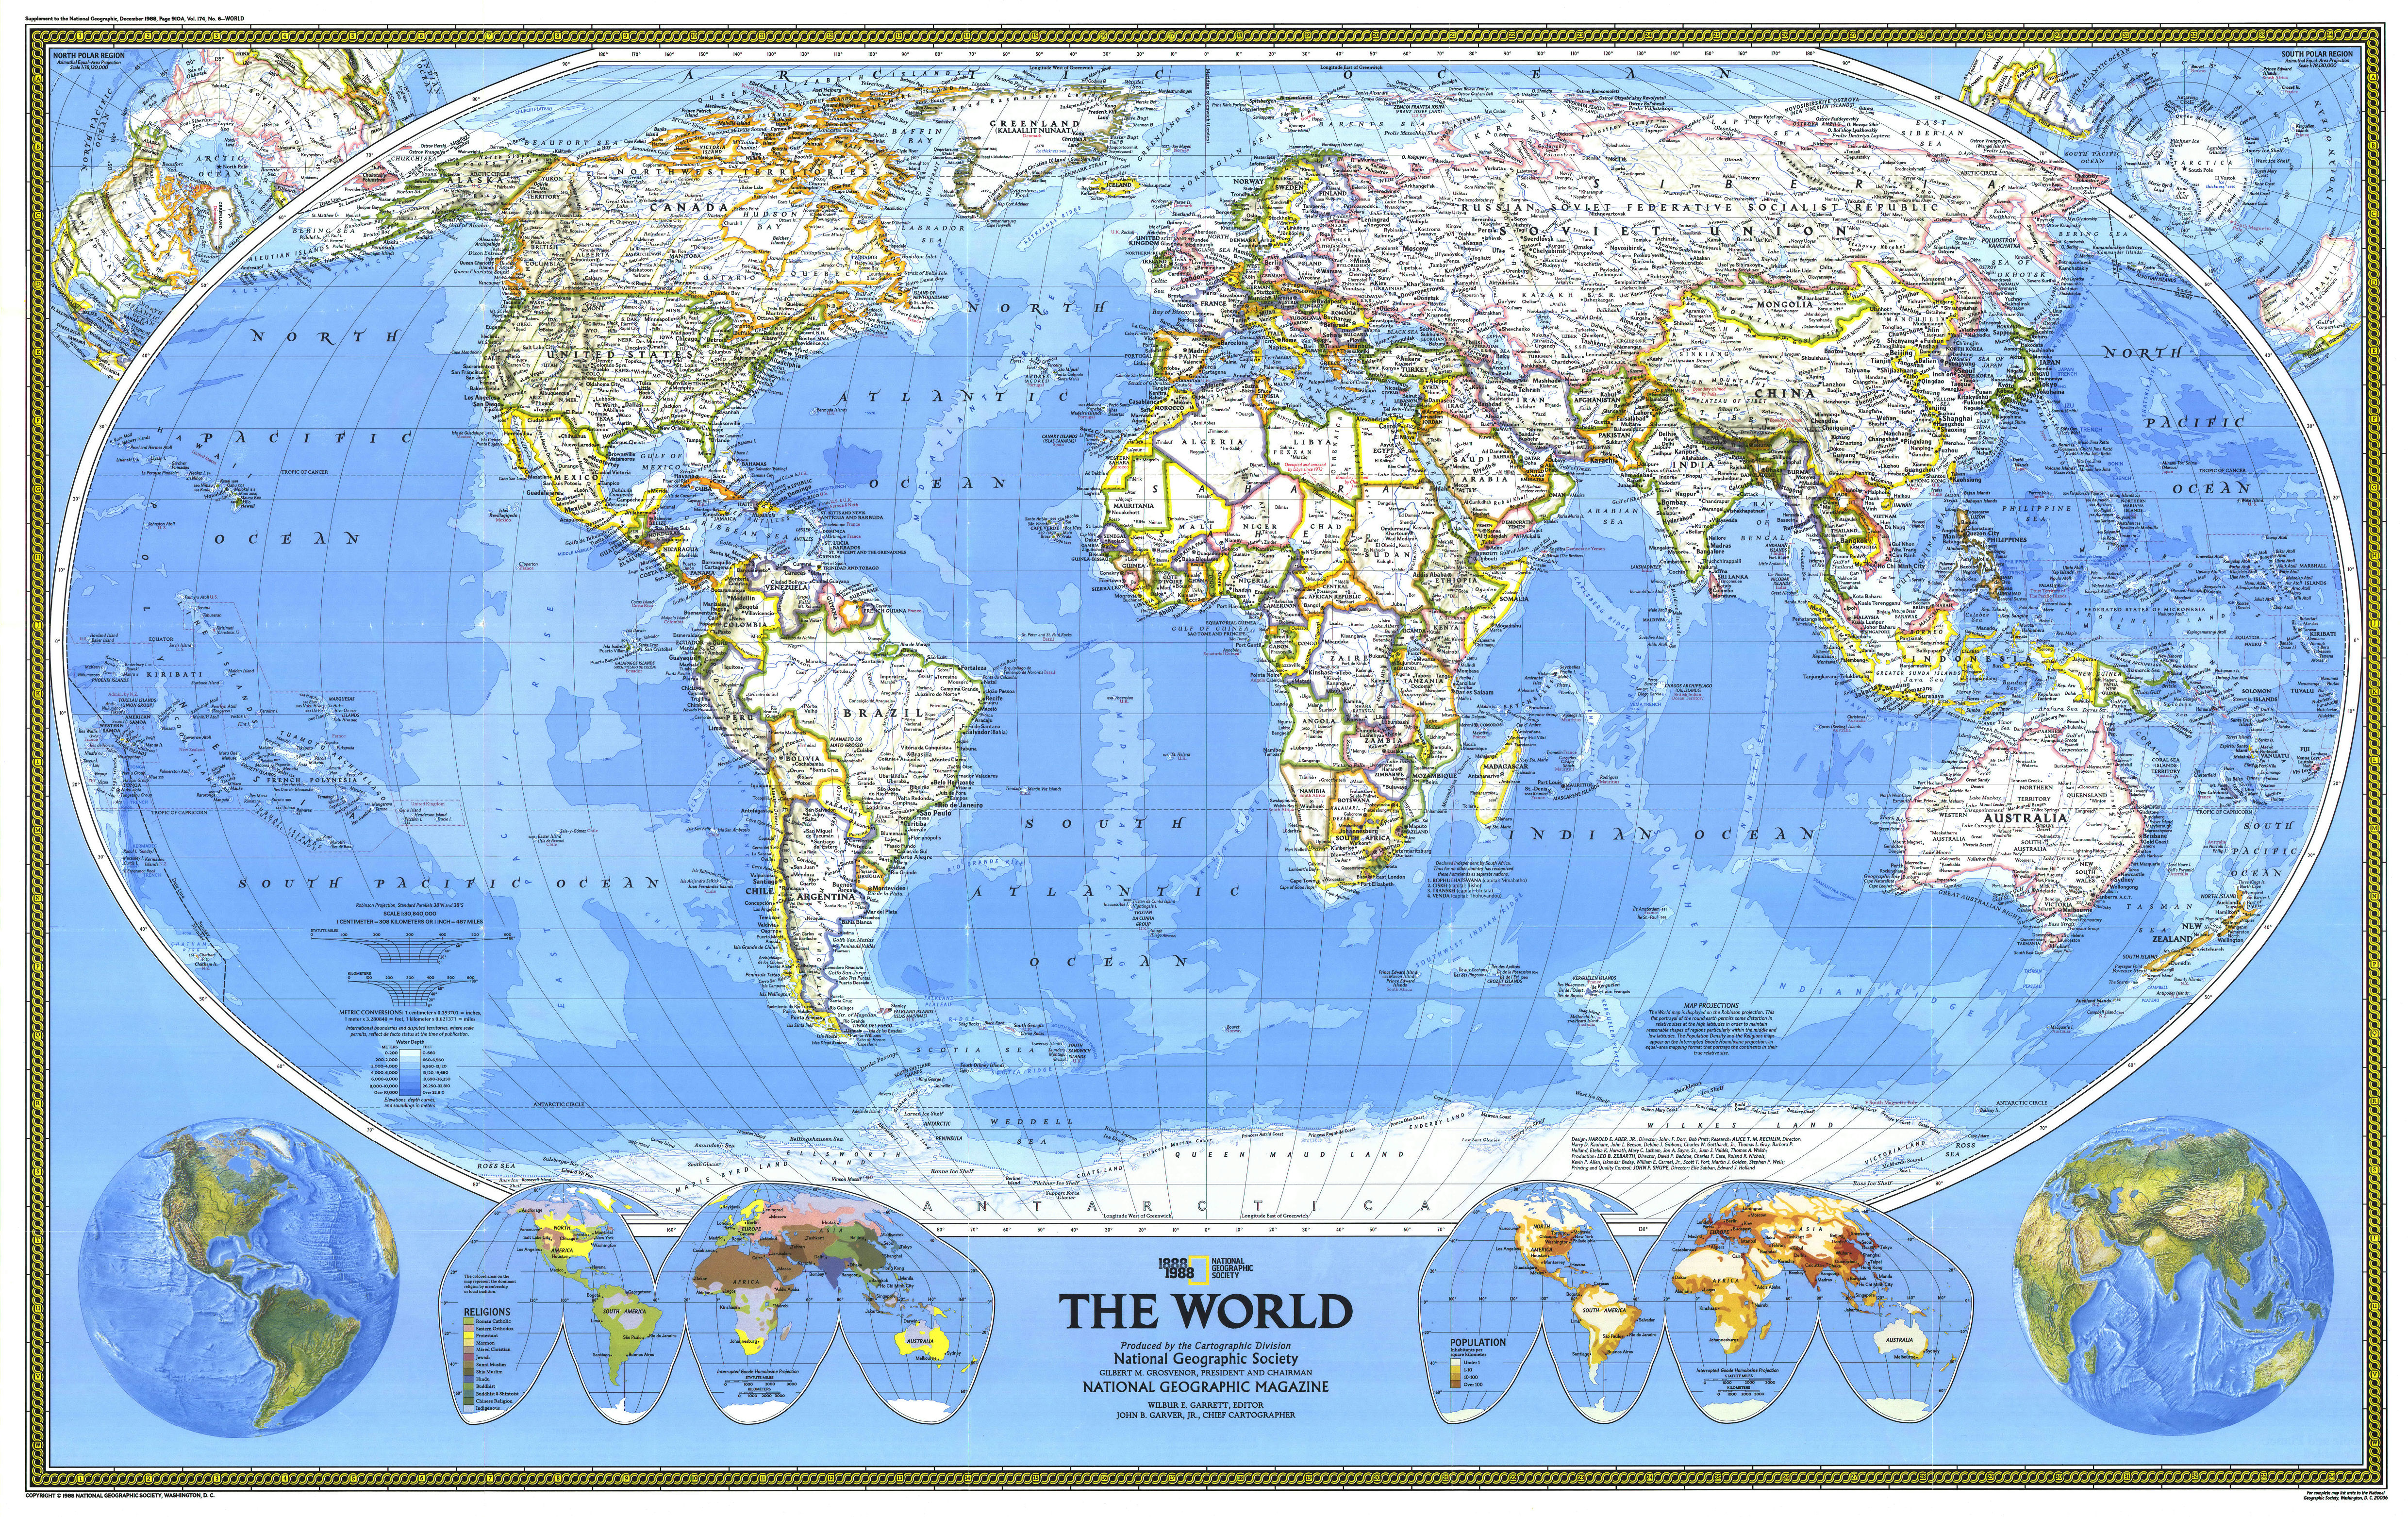 MAPS - National Geographic - World Map 1988.jpg